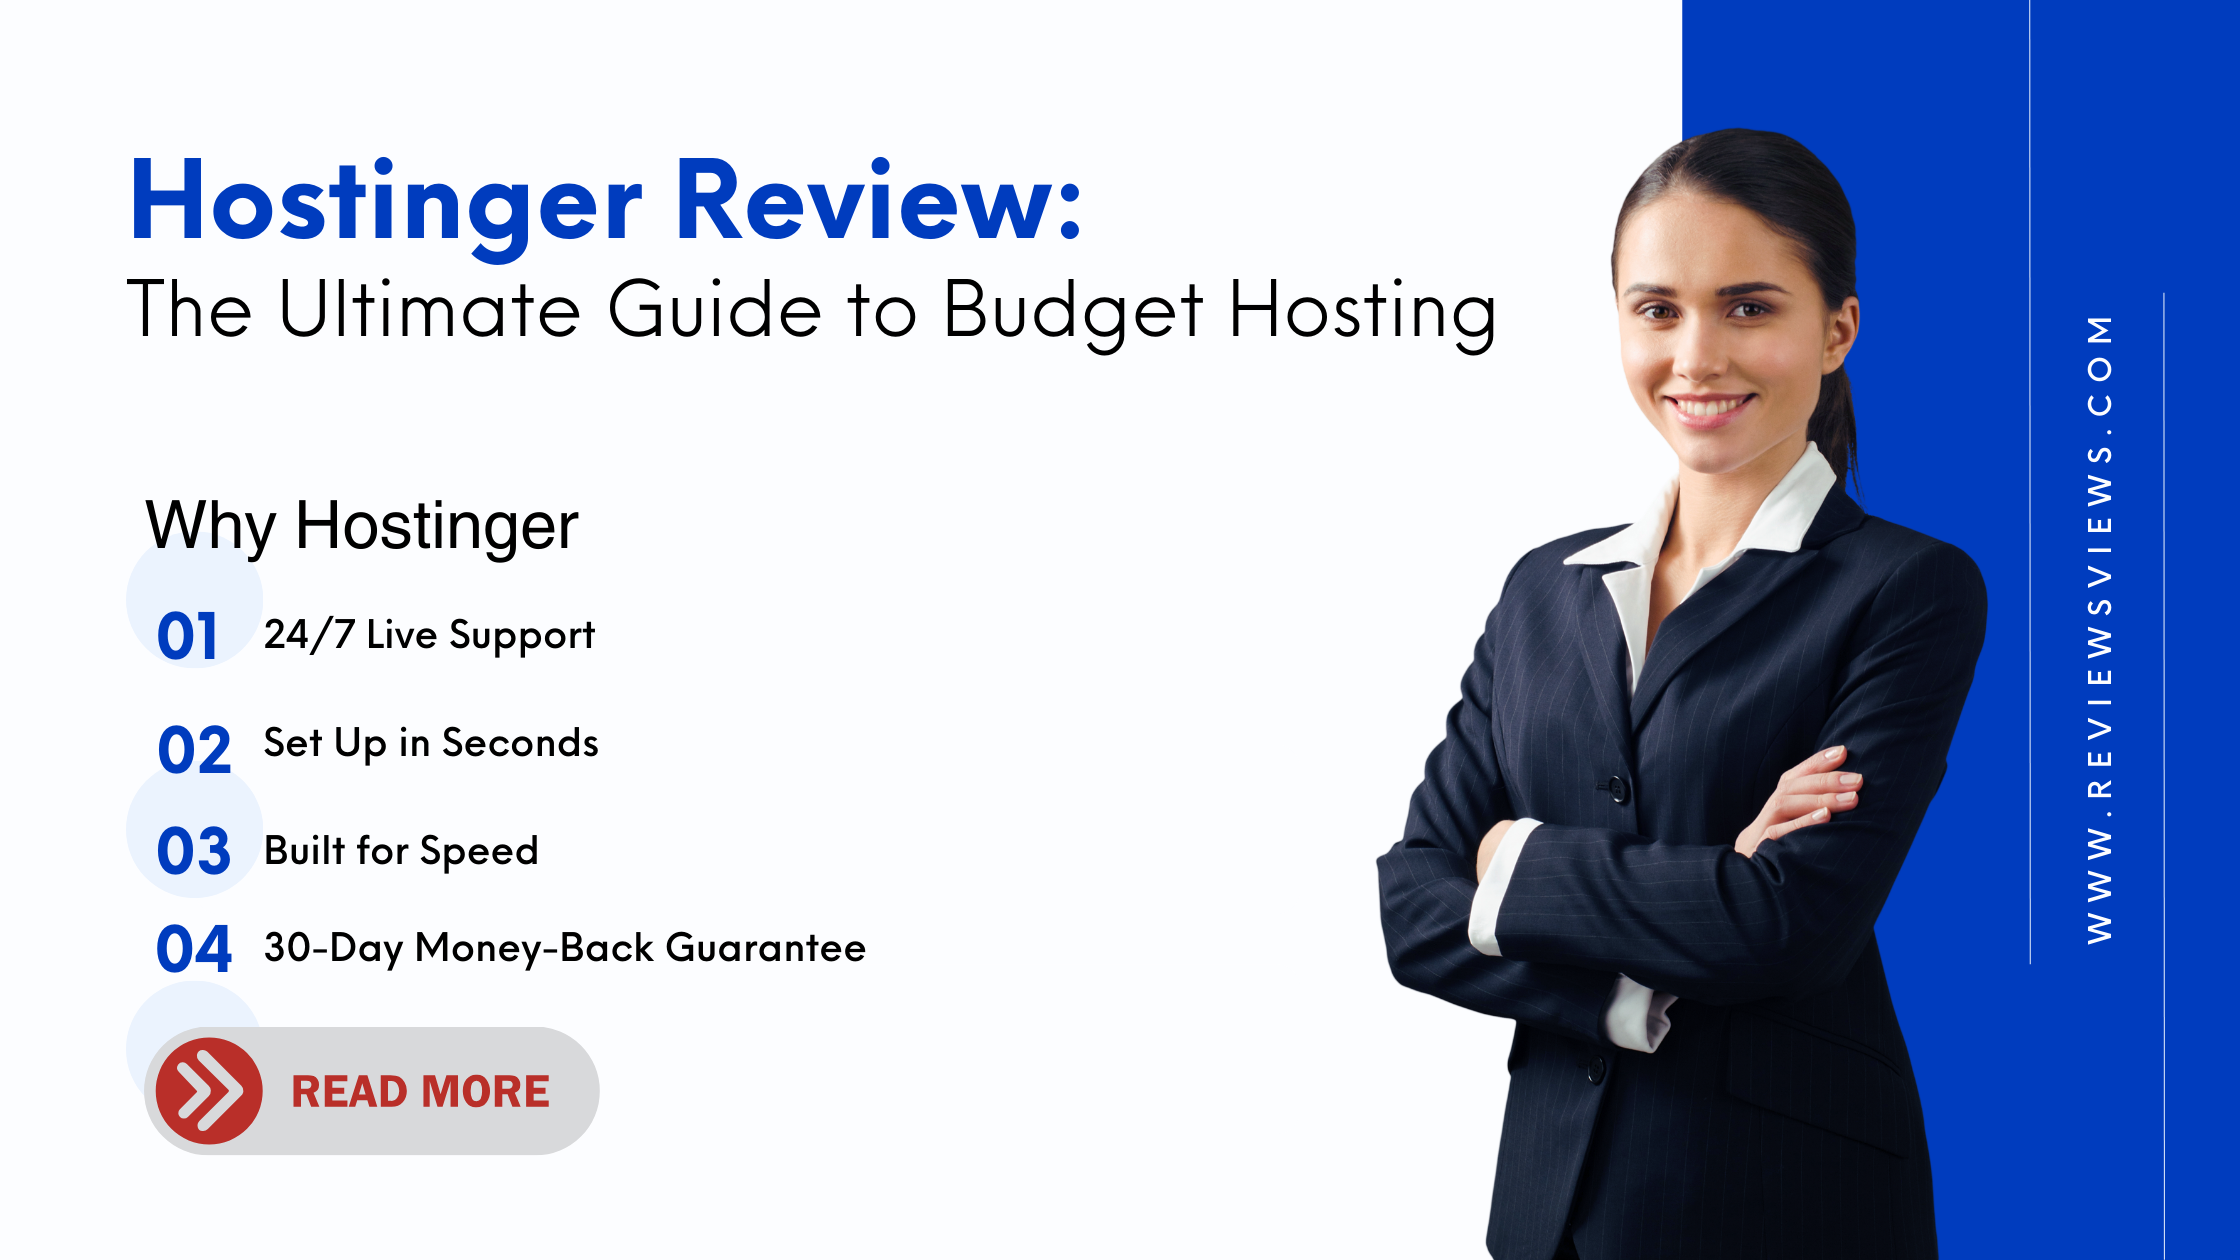 Hostinger Review: The Ultimate Guide to Budget Hosting